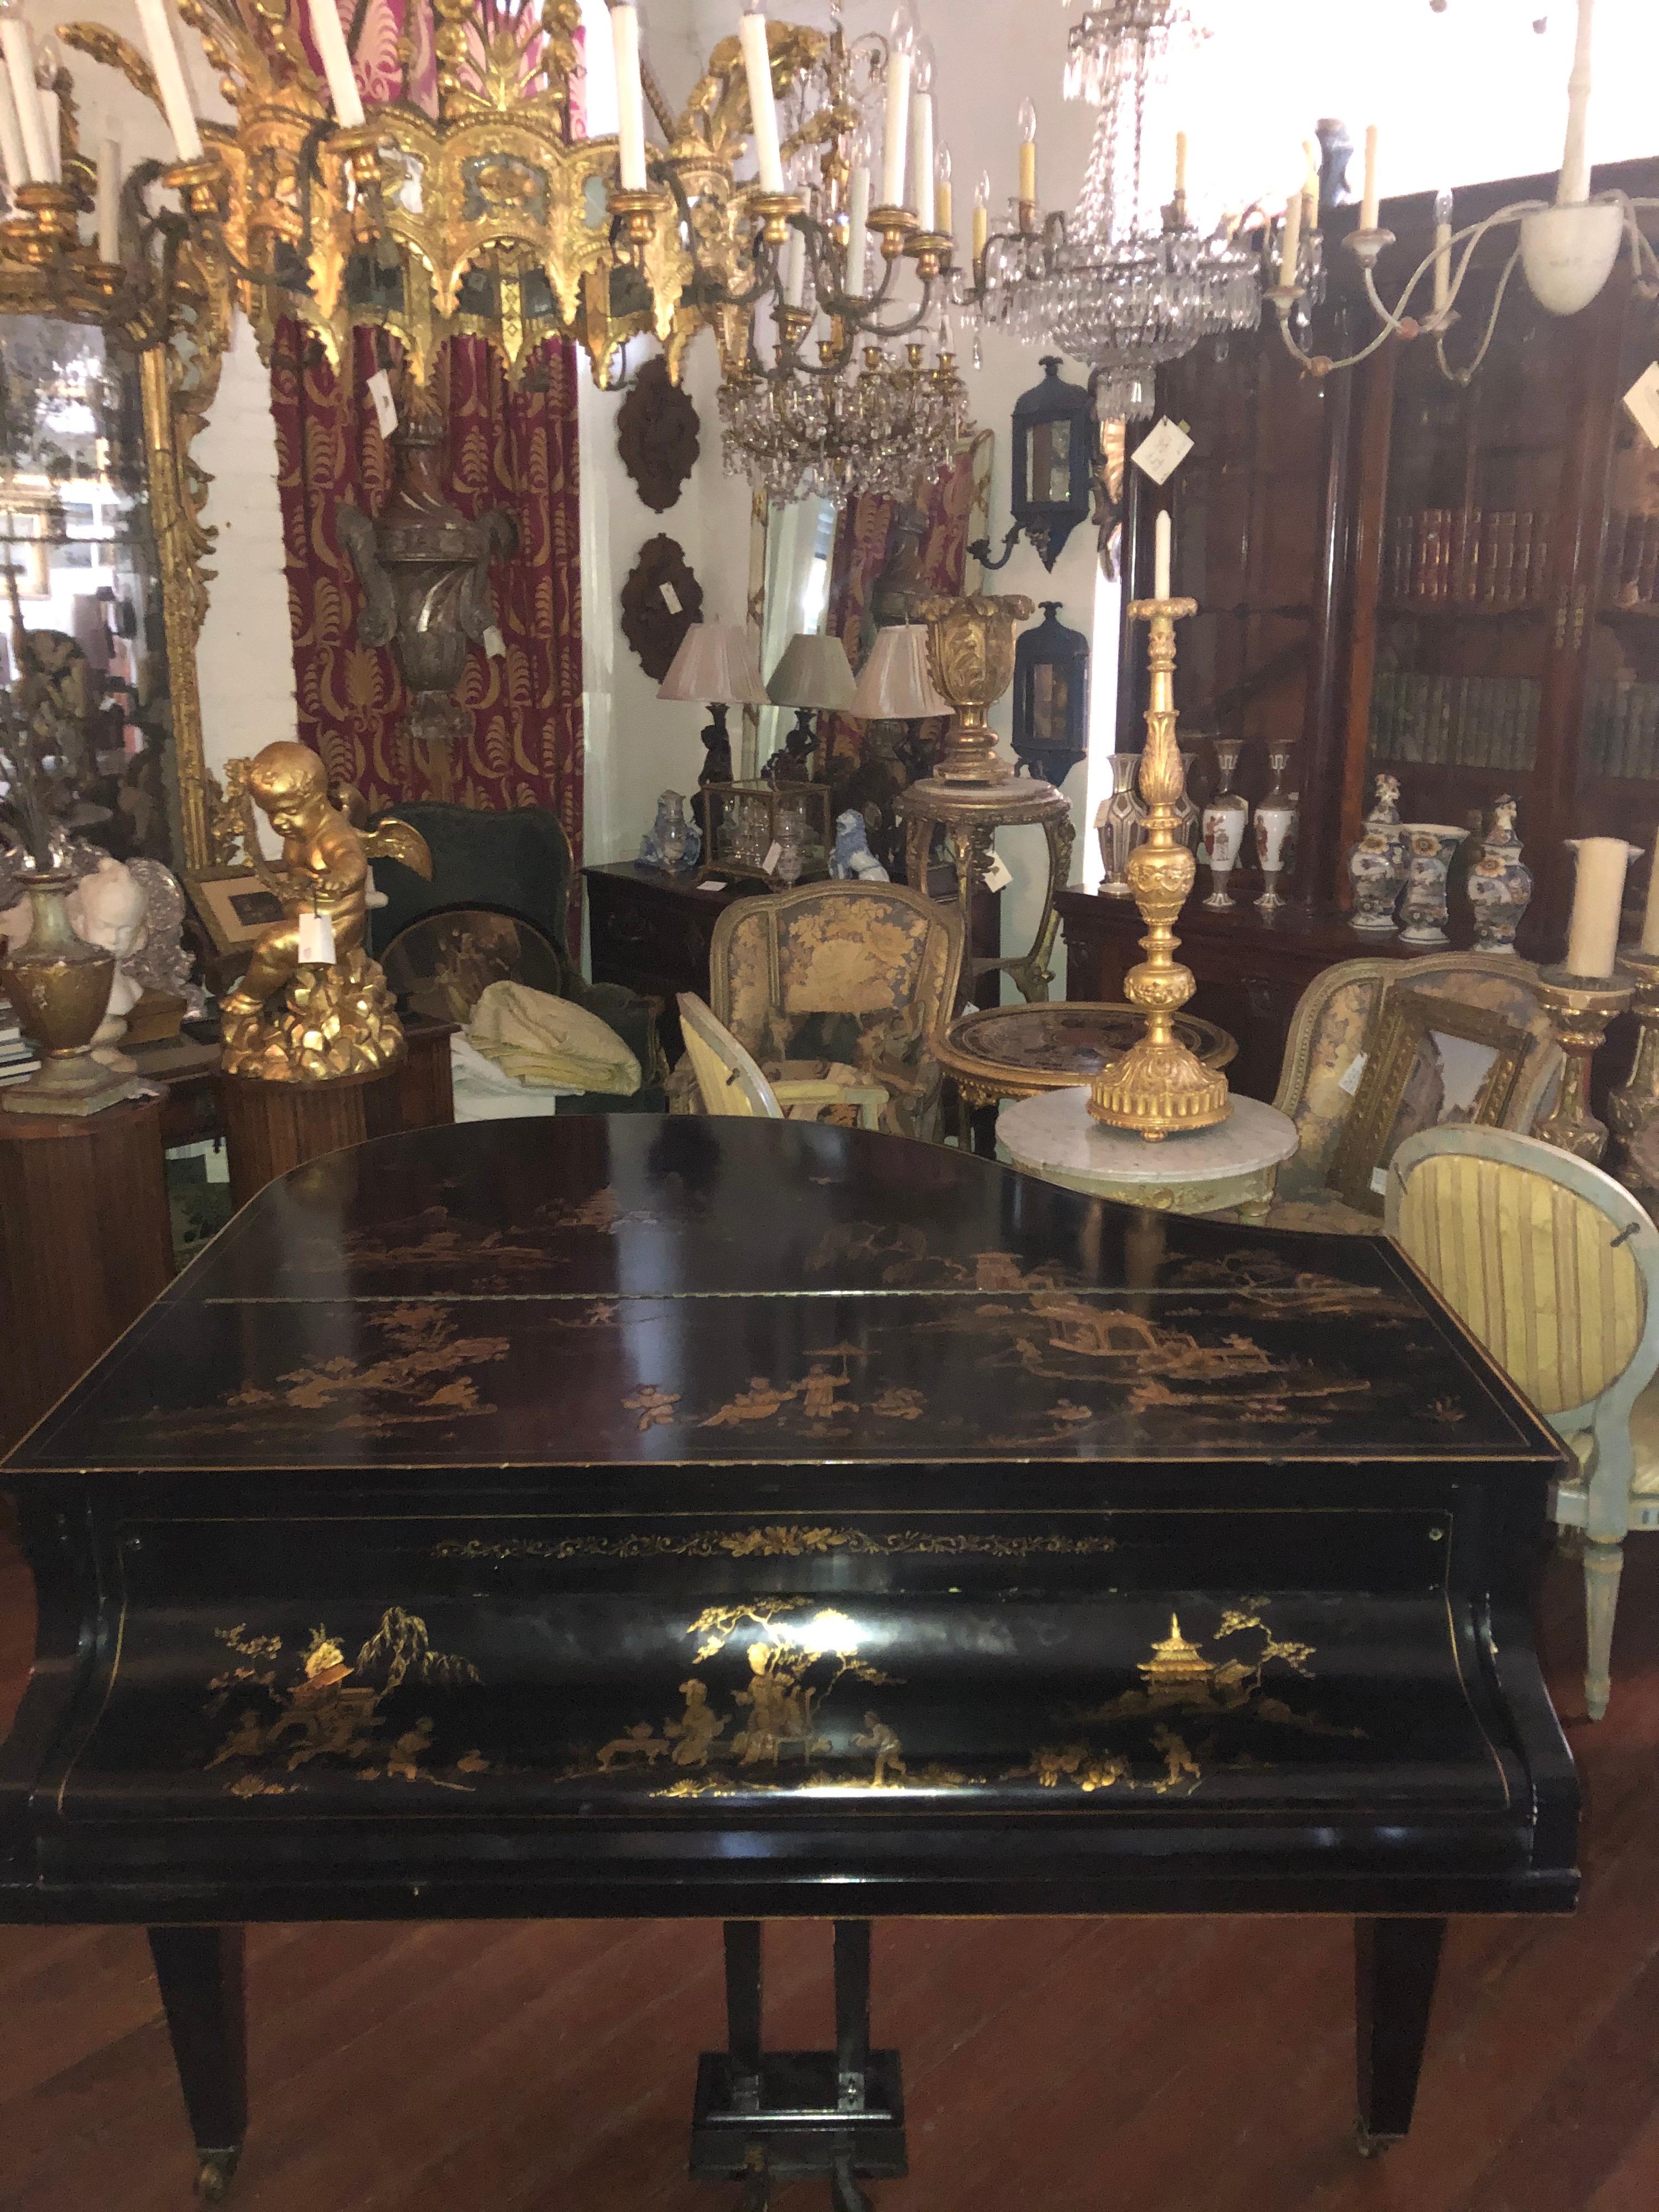 English turn of the century baby grand piano with exquisite chinoiserie decoration, gold on black Challen Piano Company was founded in 1804 in the Regency period in England. This piano was manufactured some time circa turn of the century, it holds